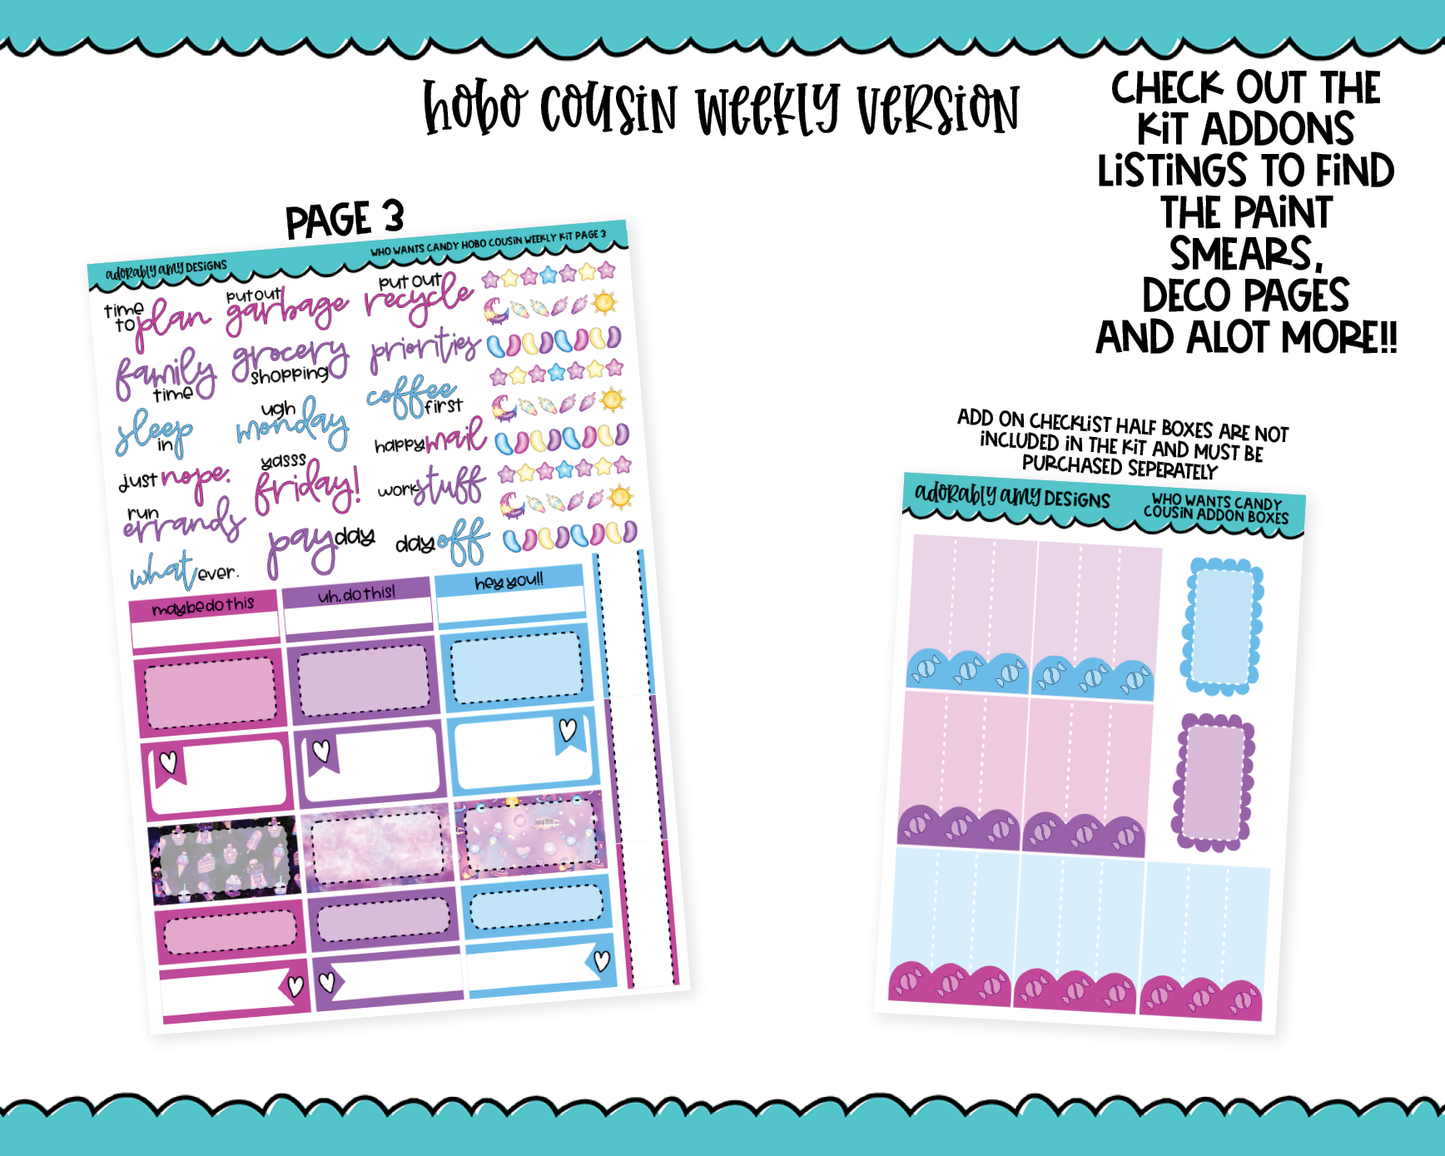 Hobonichi Cousin Weekly Who Wants Candy Themed Planner Sticker Kit for Hobo Cousin or Similar Planners